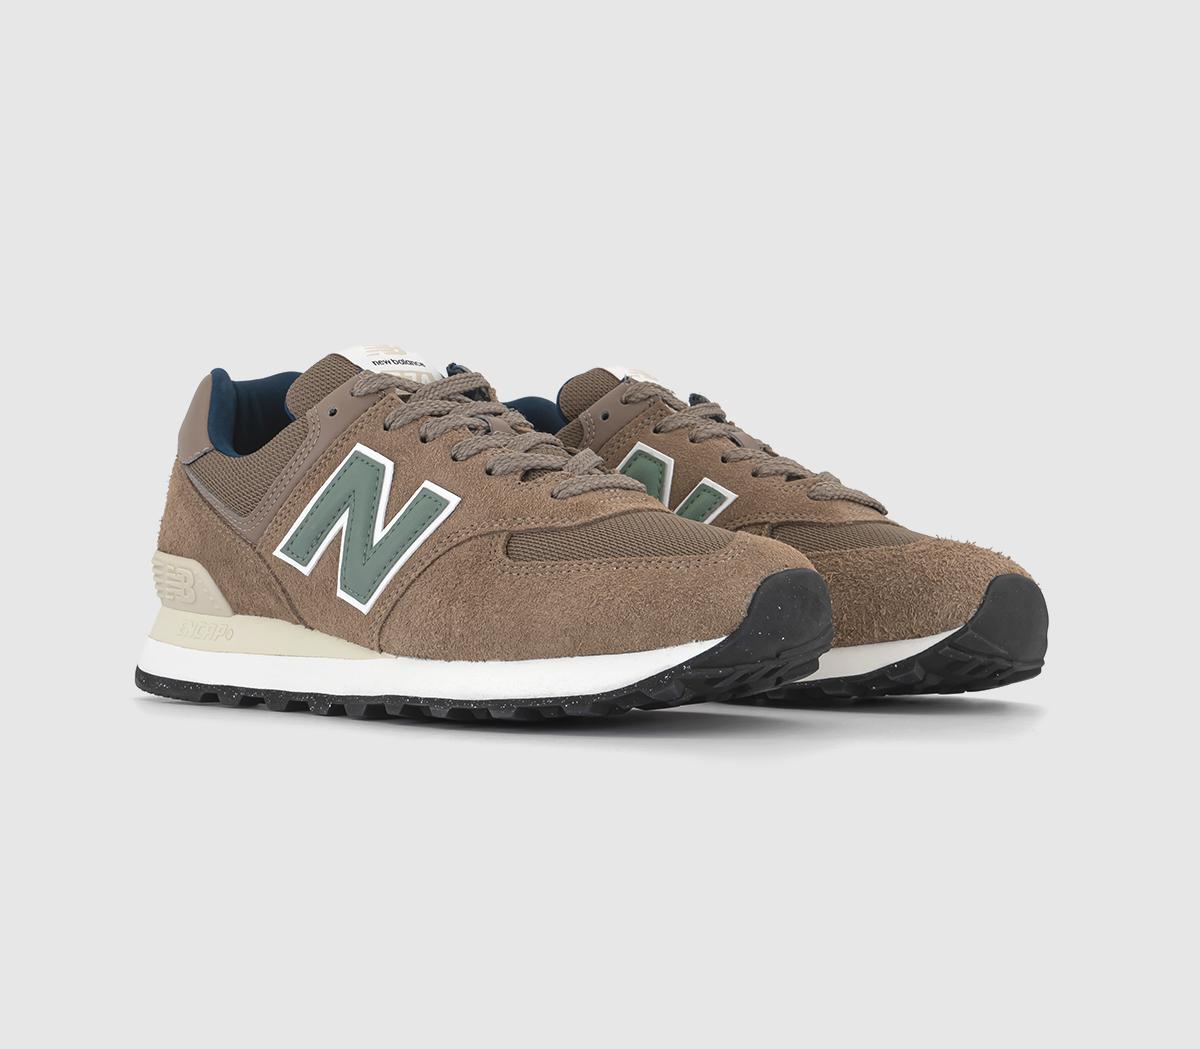 New Balance 574 Trainers Brown Brown Green, 9.5